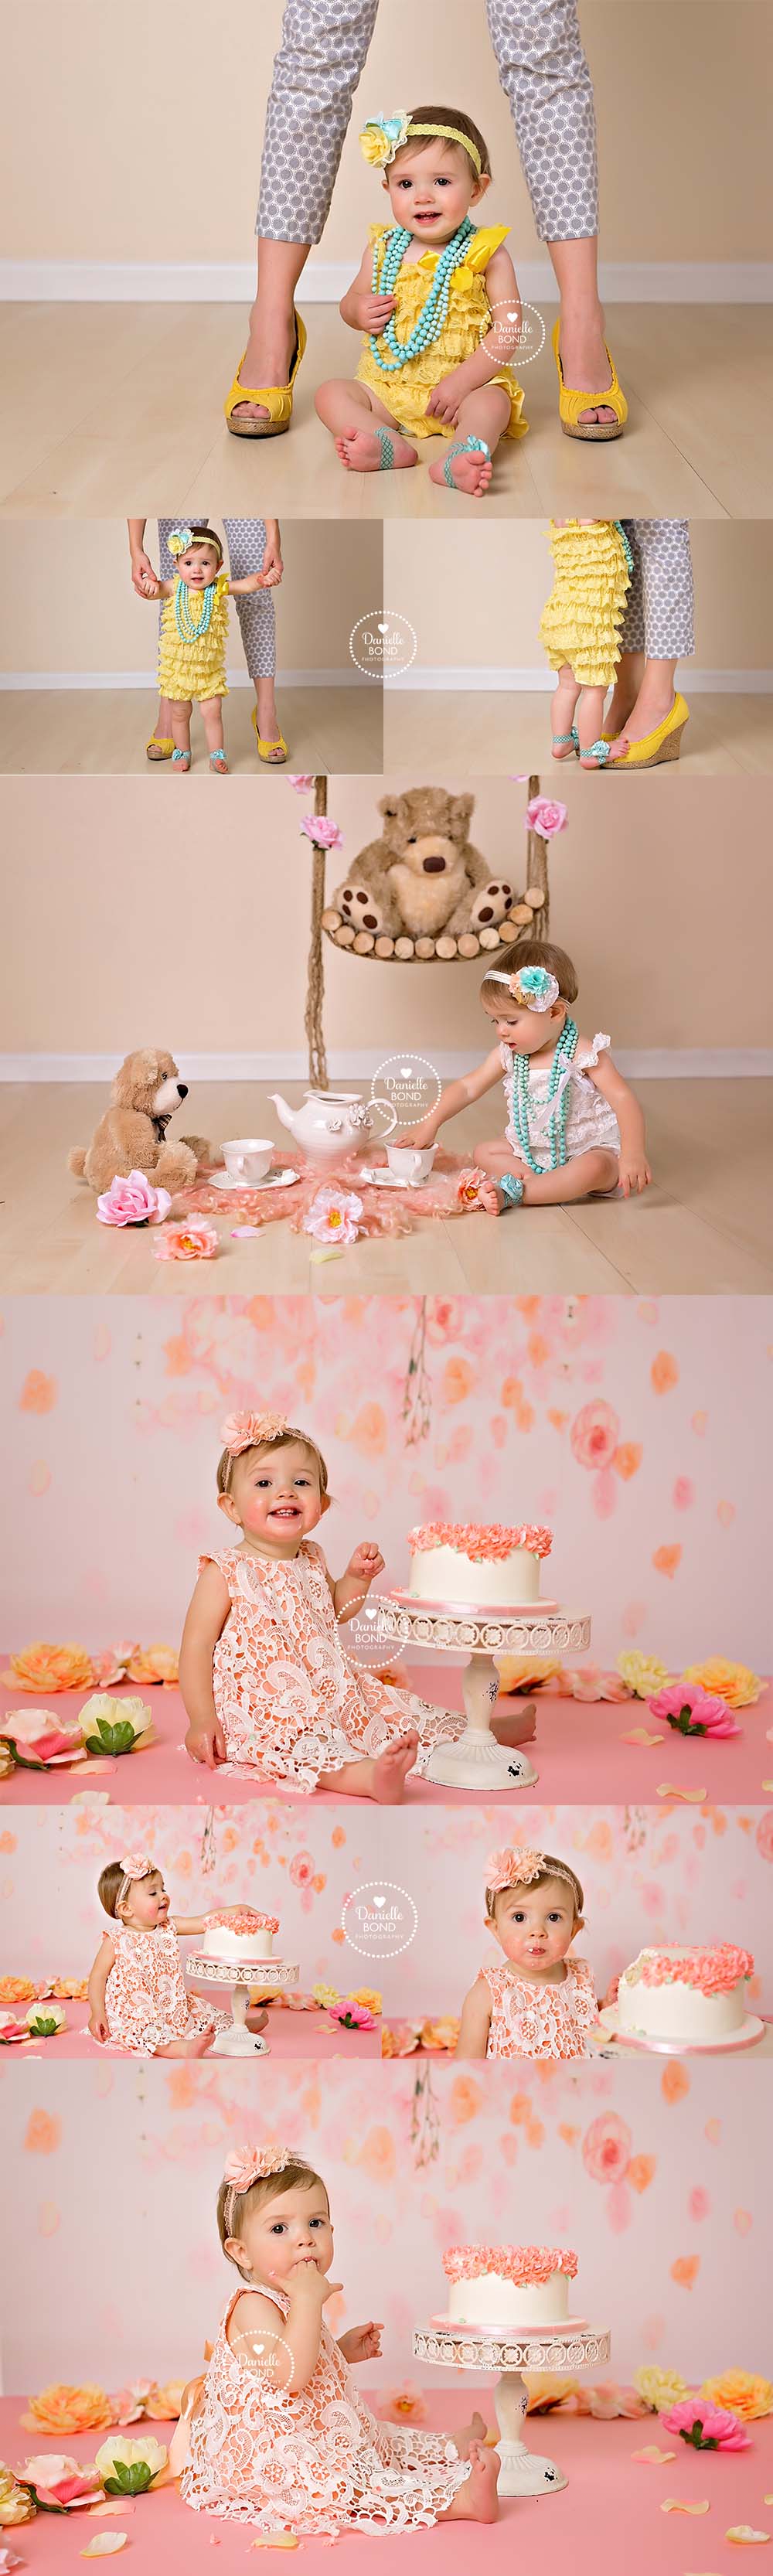 girly 1 year photos with a floral cake smash